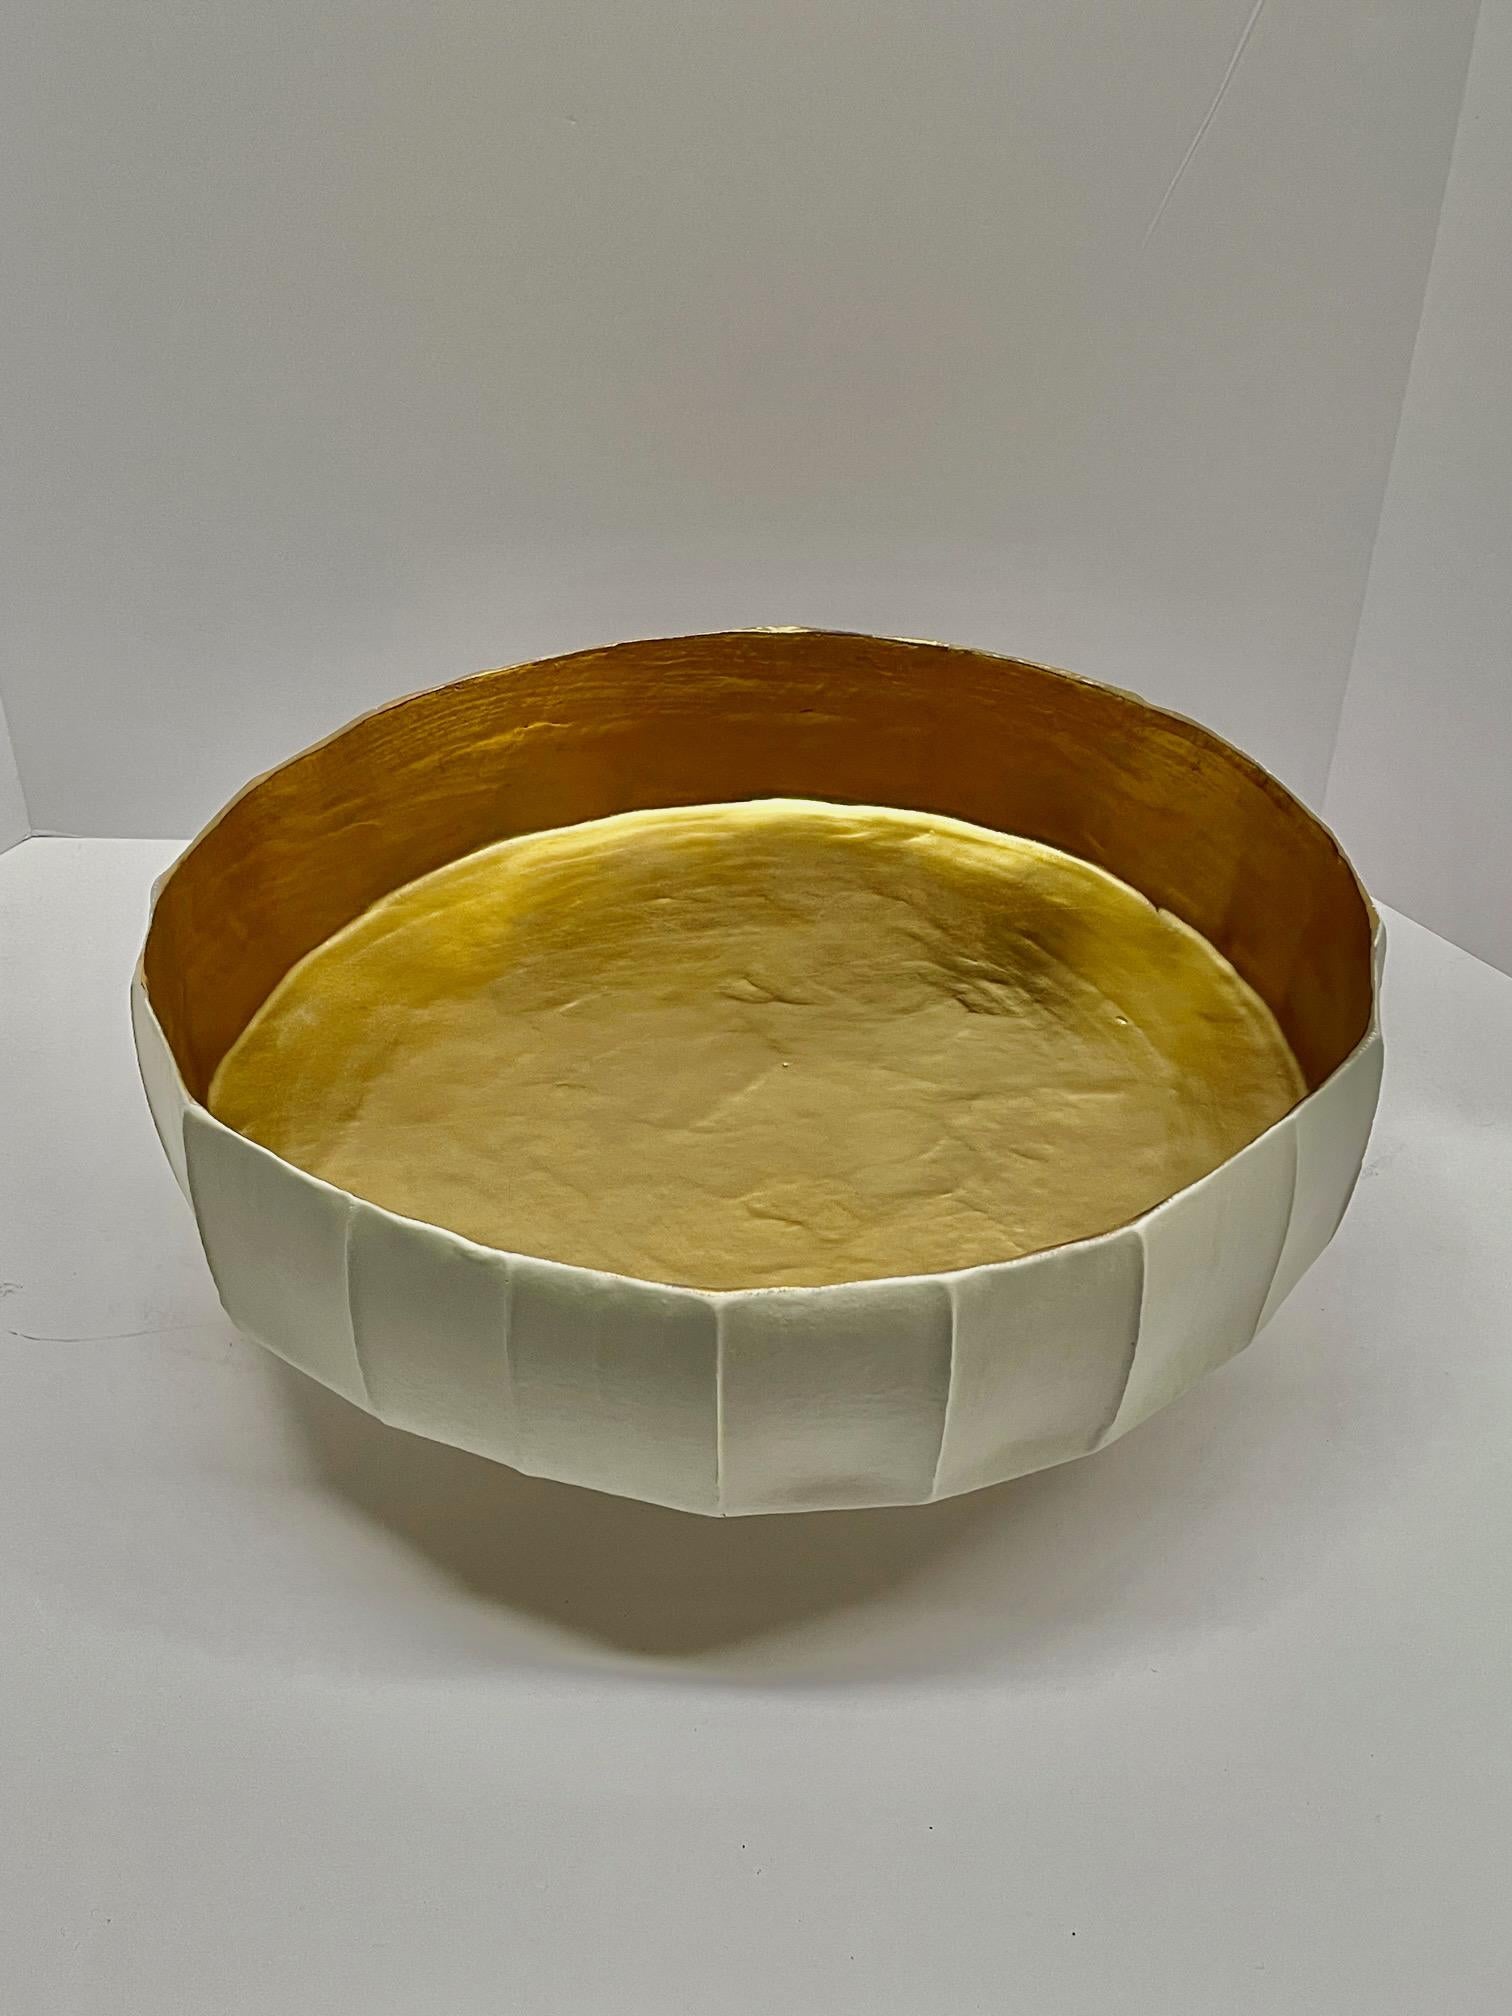 White Porcelain With 22 Karat Gold Interior Footed Bowl, Italy, Contemporary  1